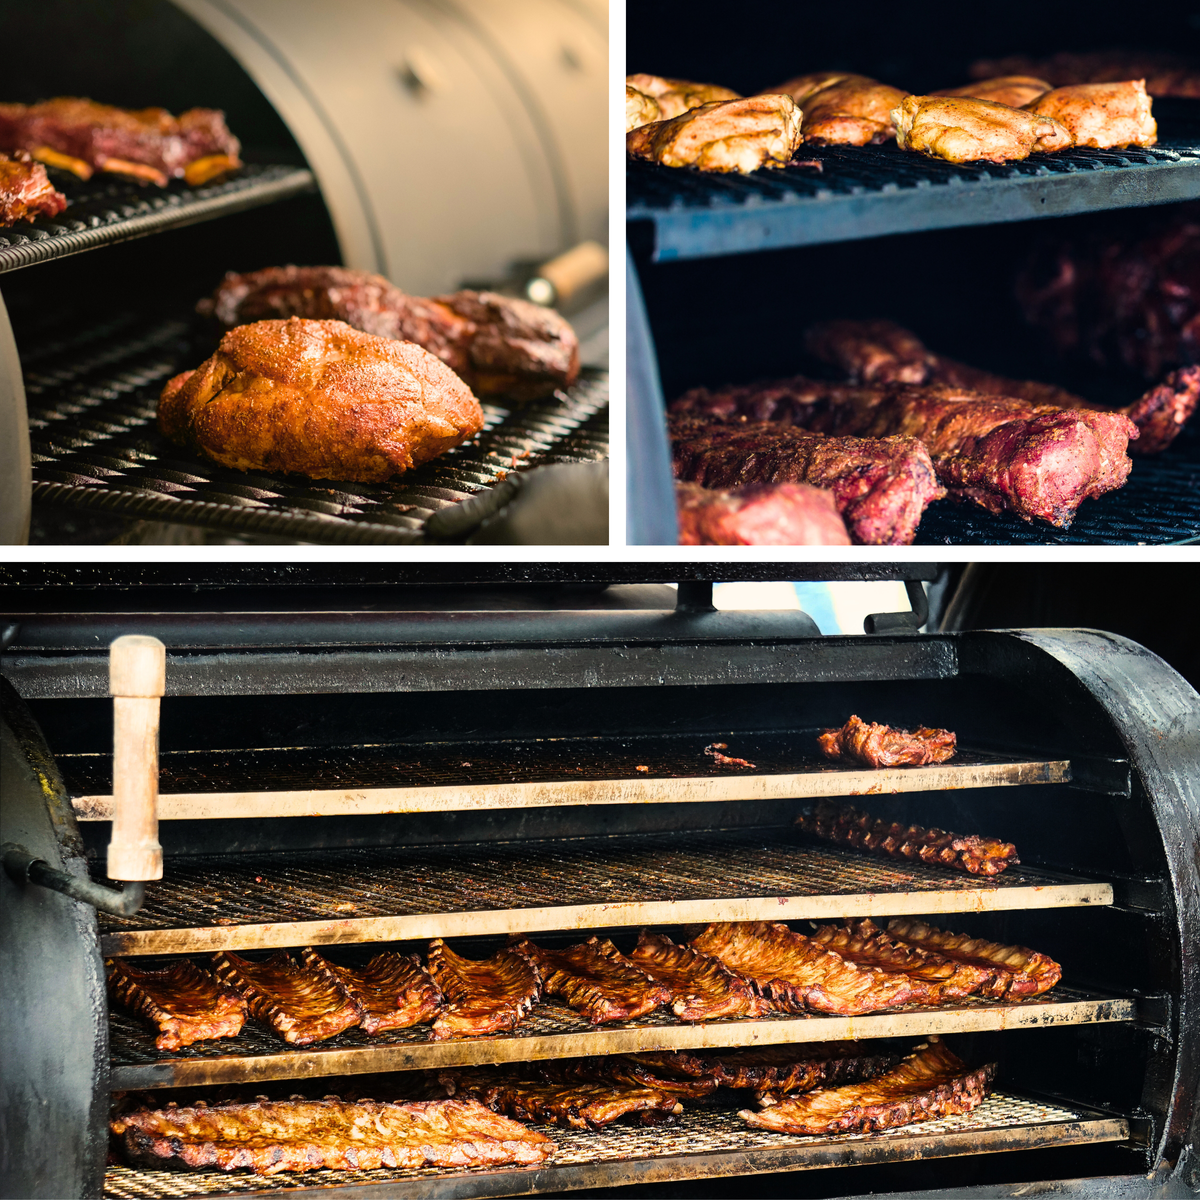 3 Different Smoker Grills With Large Quantities of Meat